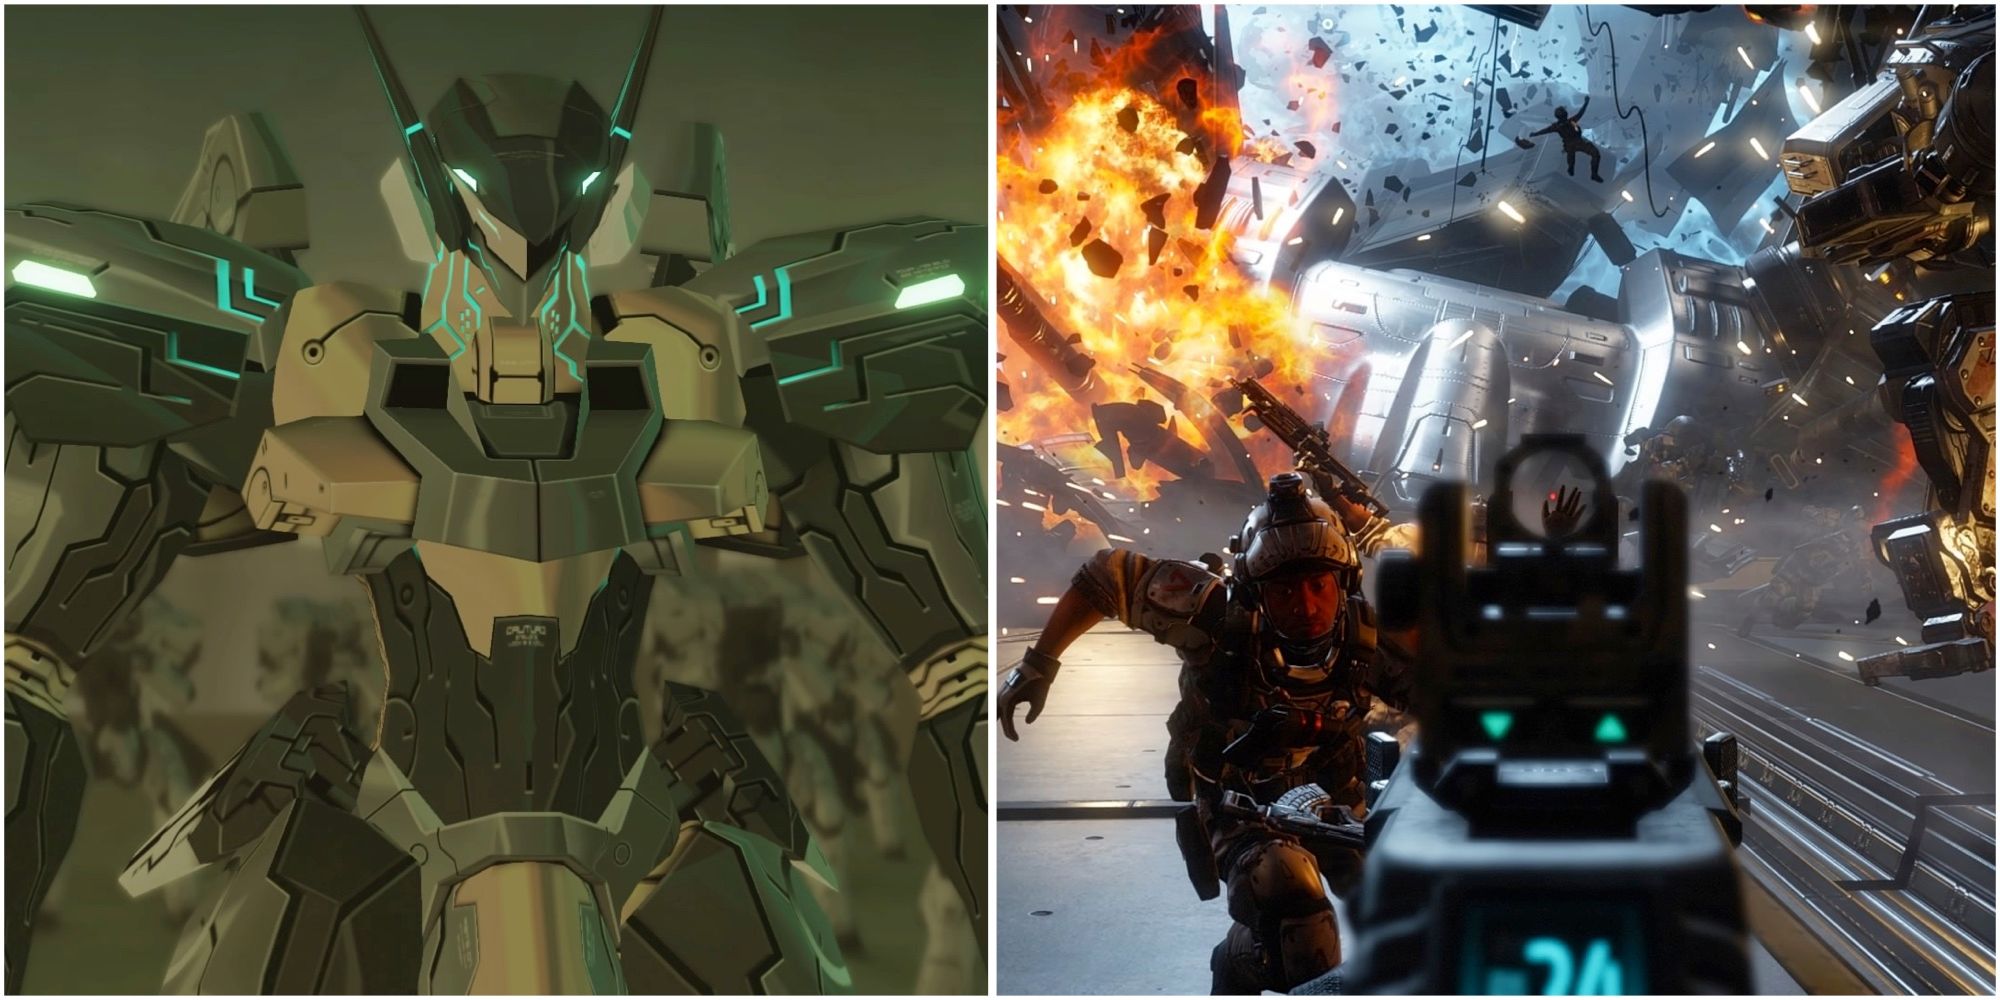 Jehuty in Zone Of The Enders The Second Runner and Fighting enemies in Titanfall 2